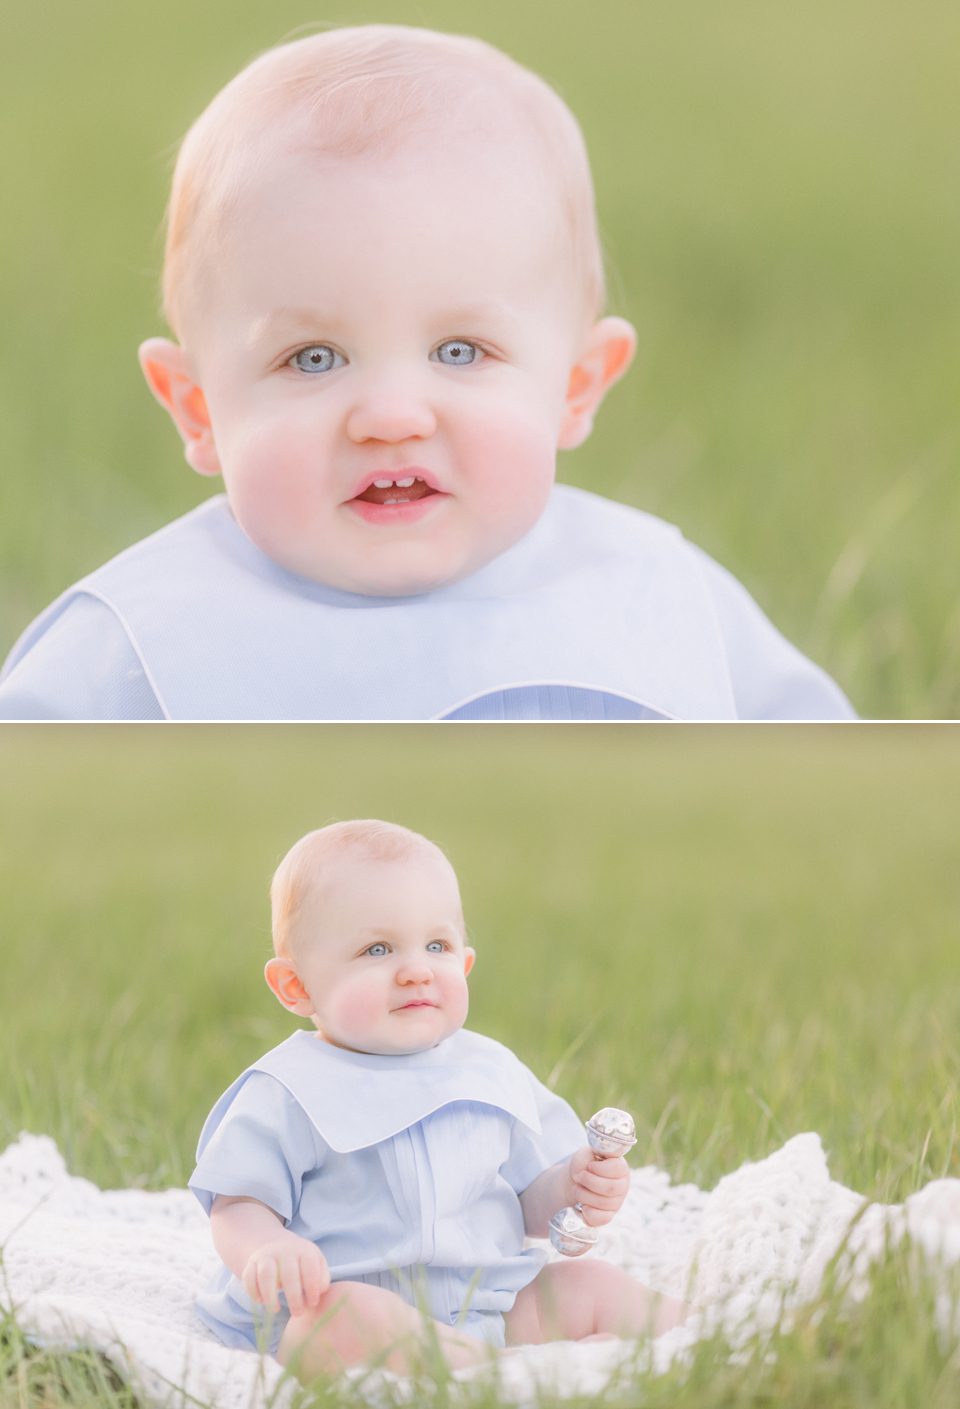 Outdoor baby photography in the Athens, GA area.